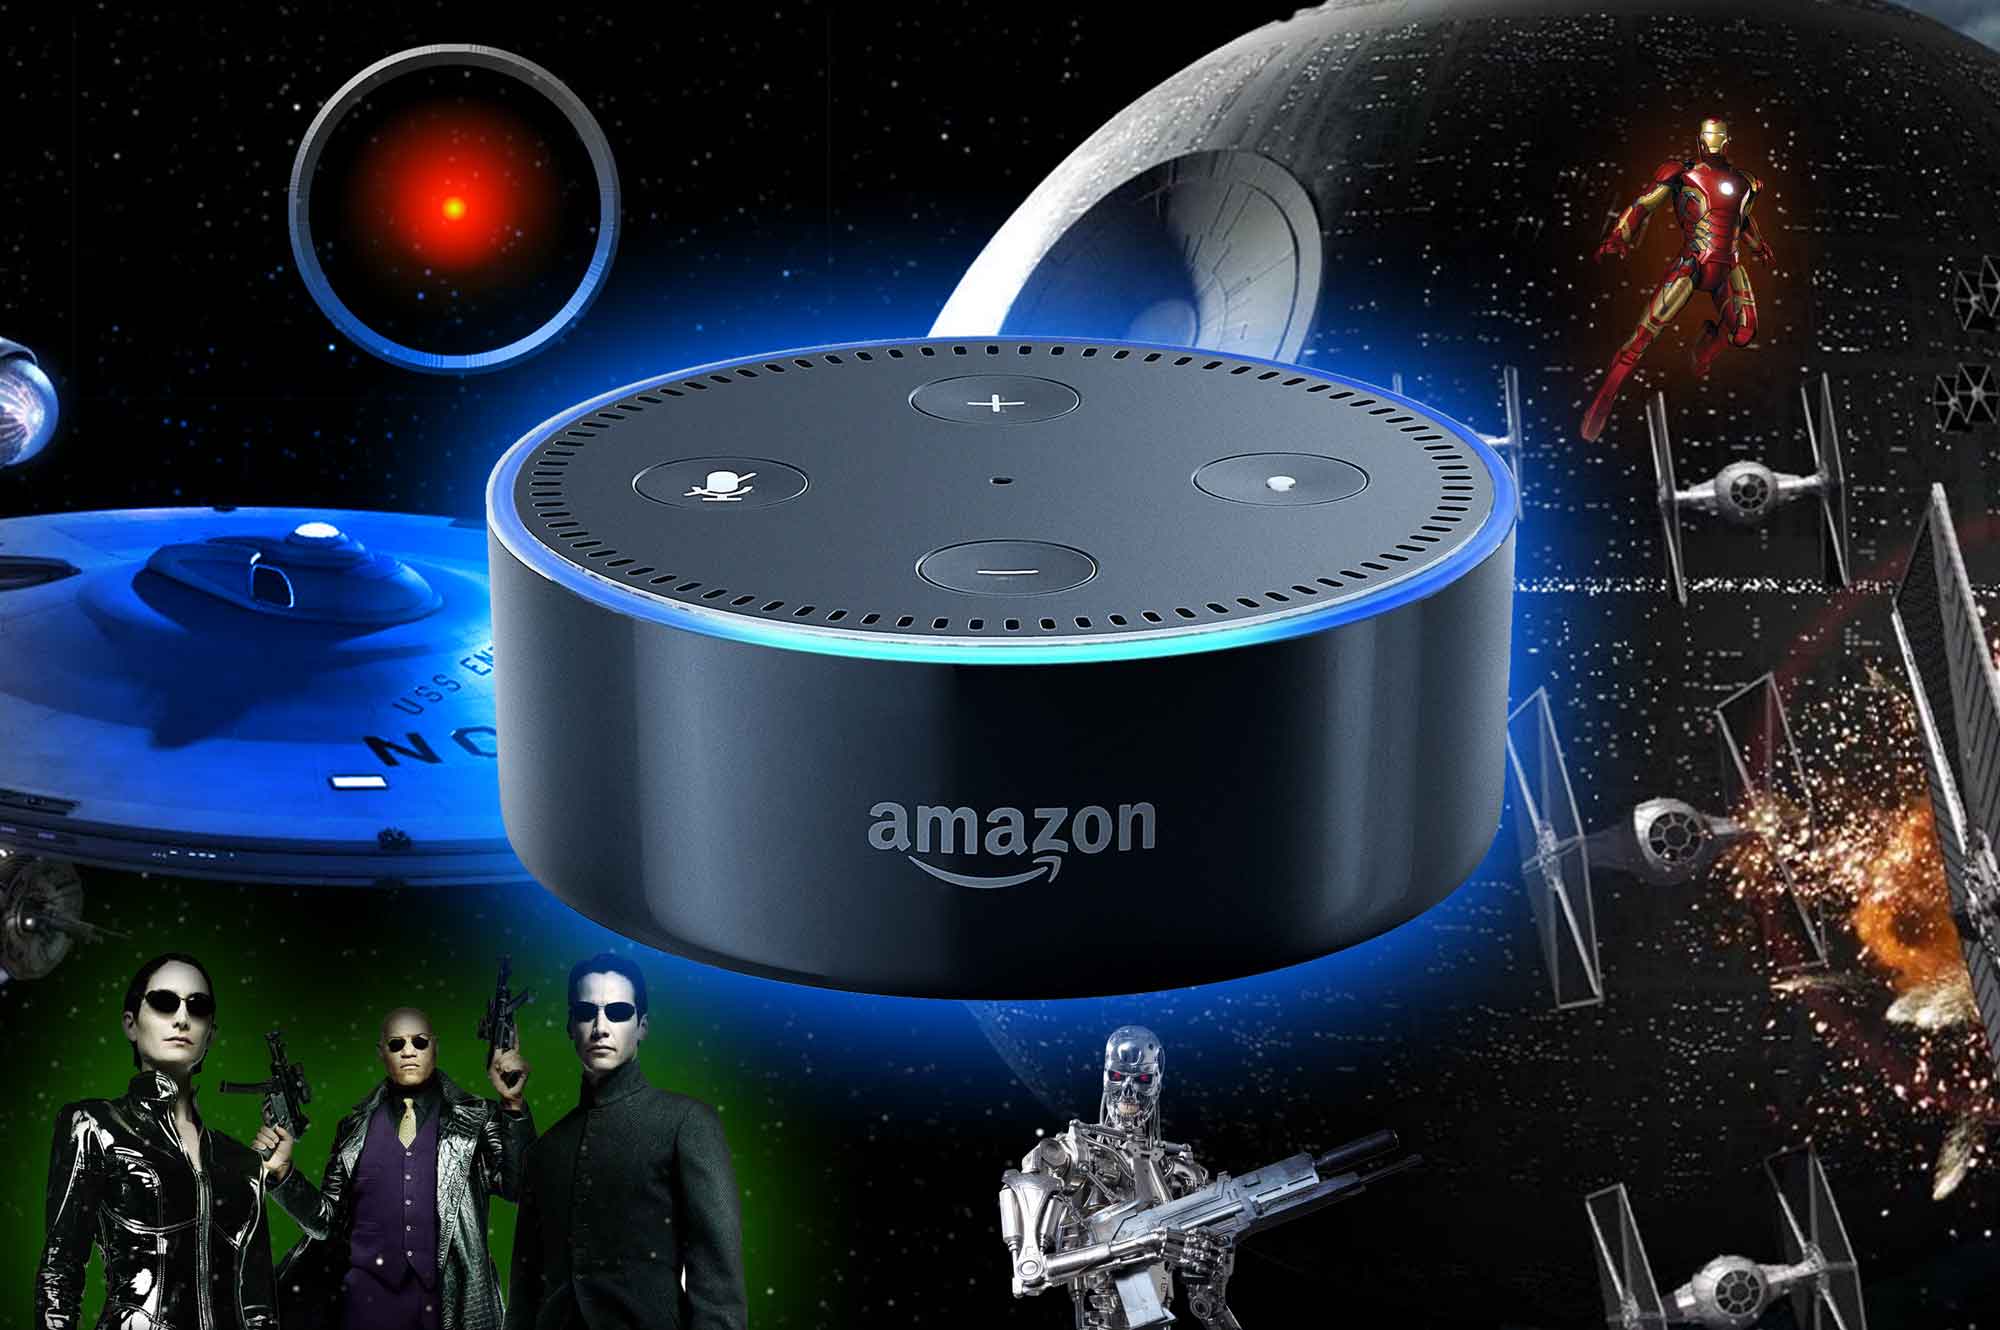 15 Funny Sci-Fi Related Commands To Ask Alexa